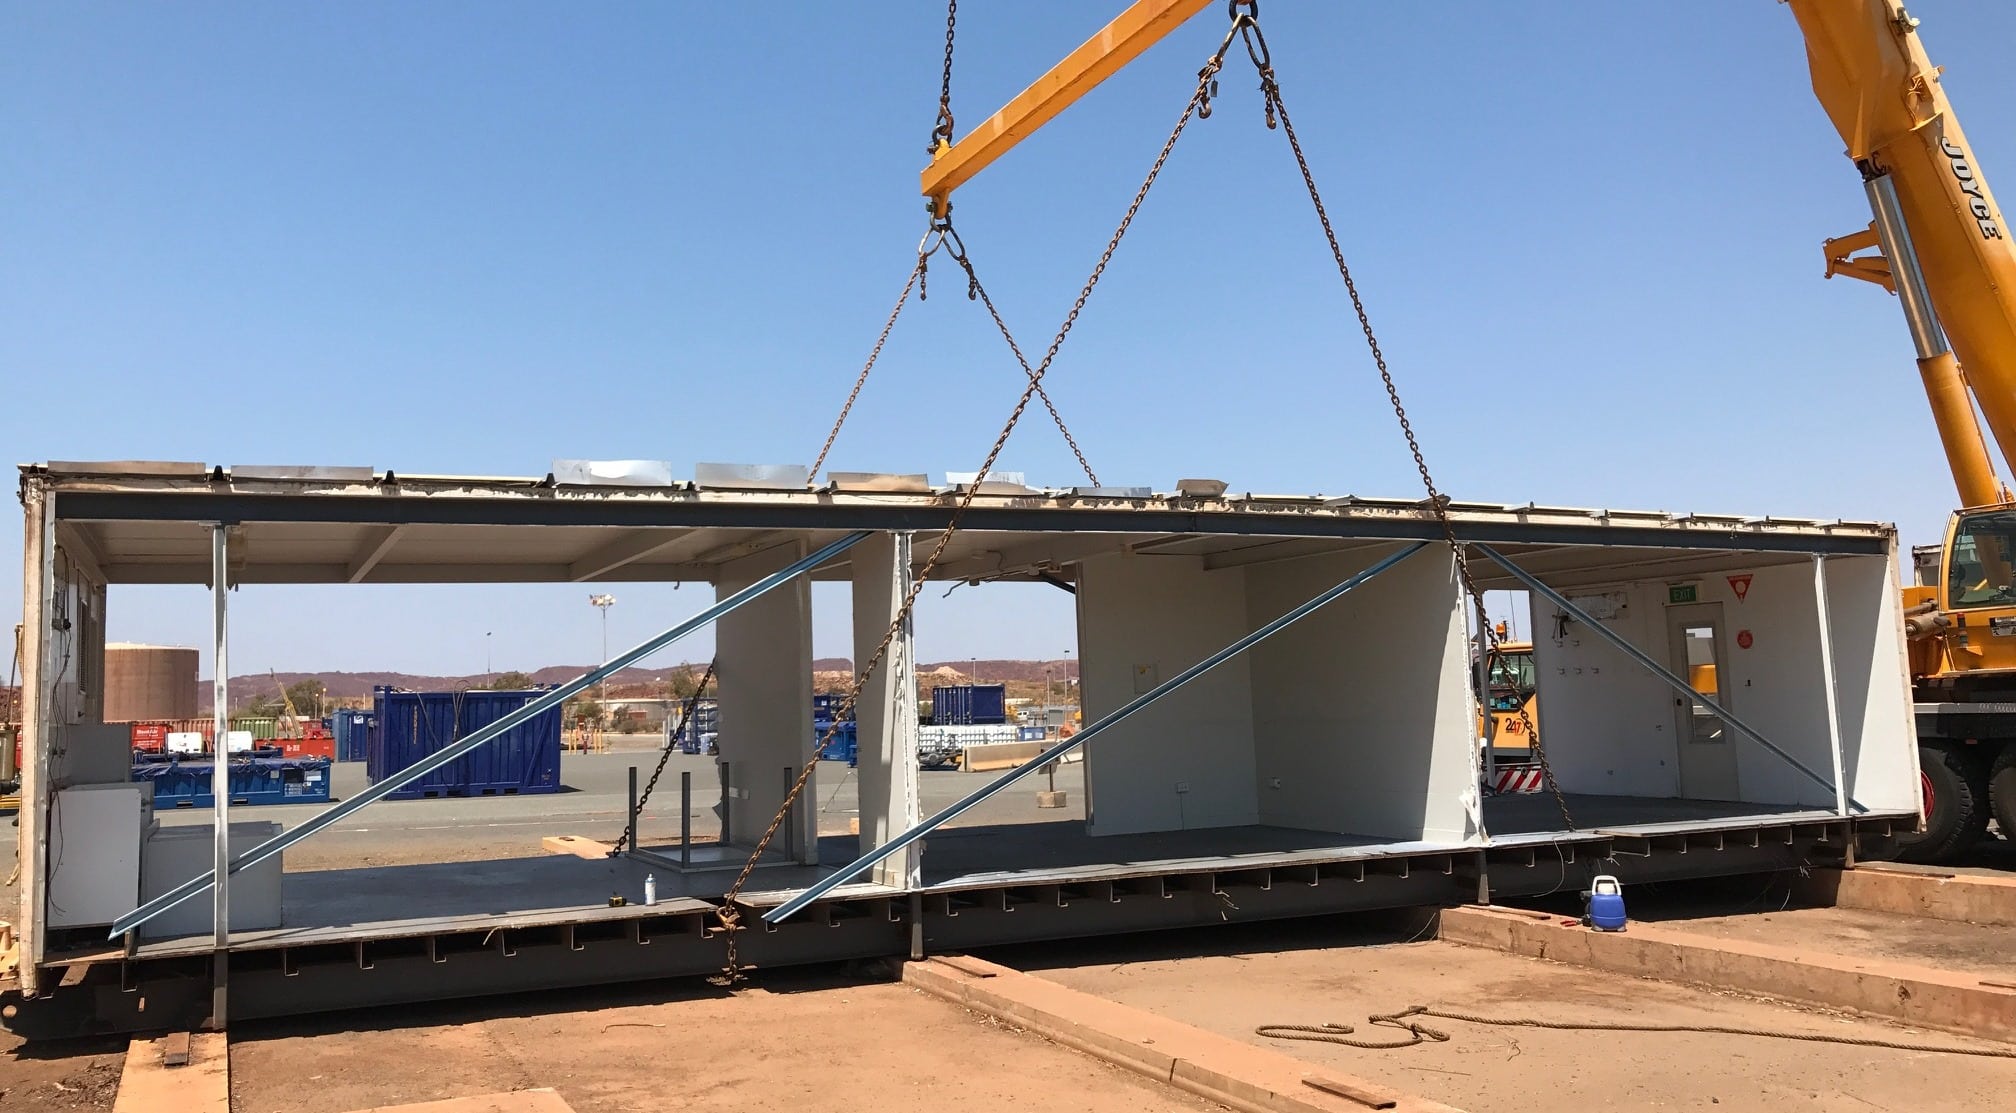 Shed construction by crane for commercial project in the Pilbara